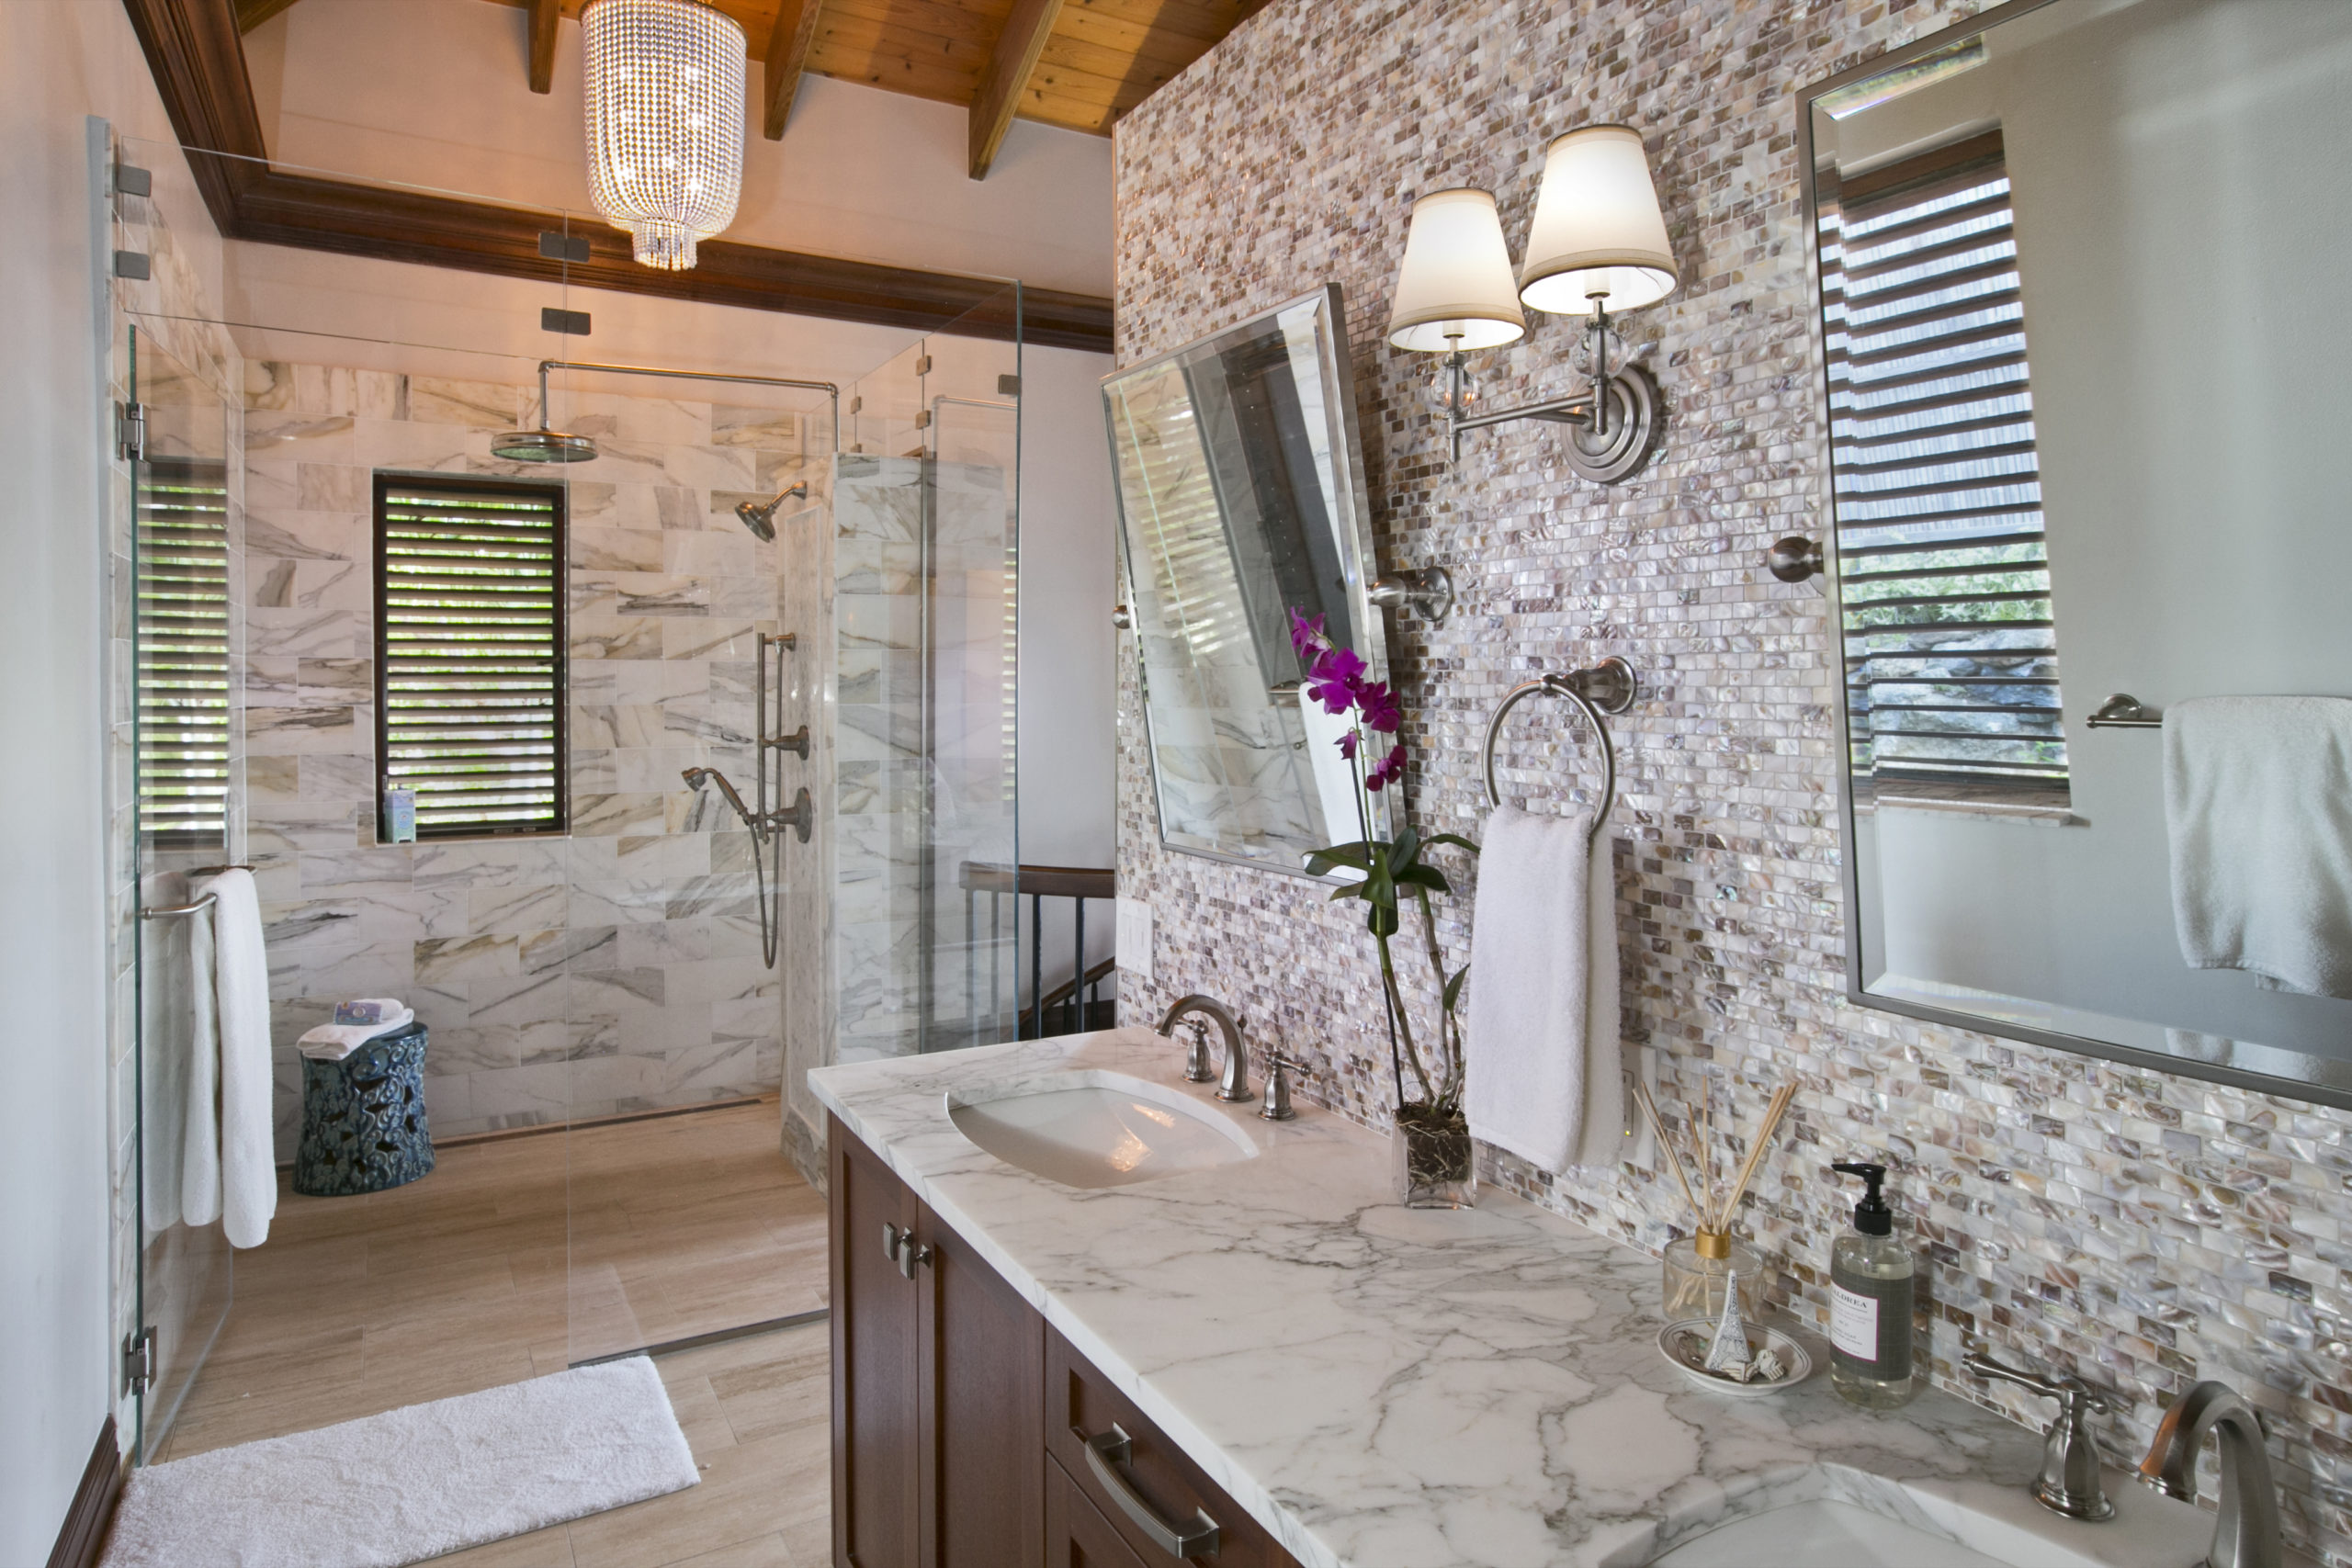 Master bathroom with calacatta tile a double vanity and luxurious walk in shower.